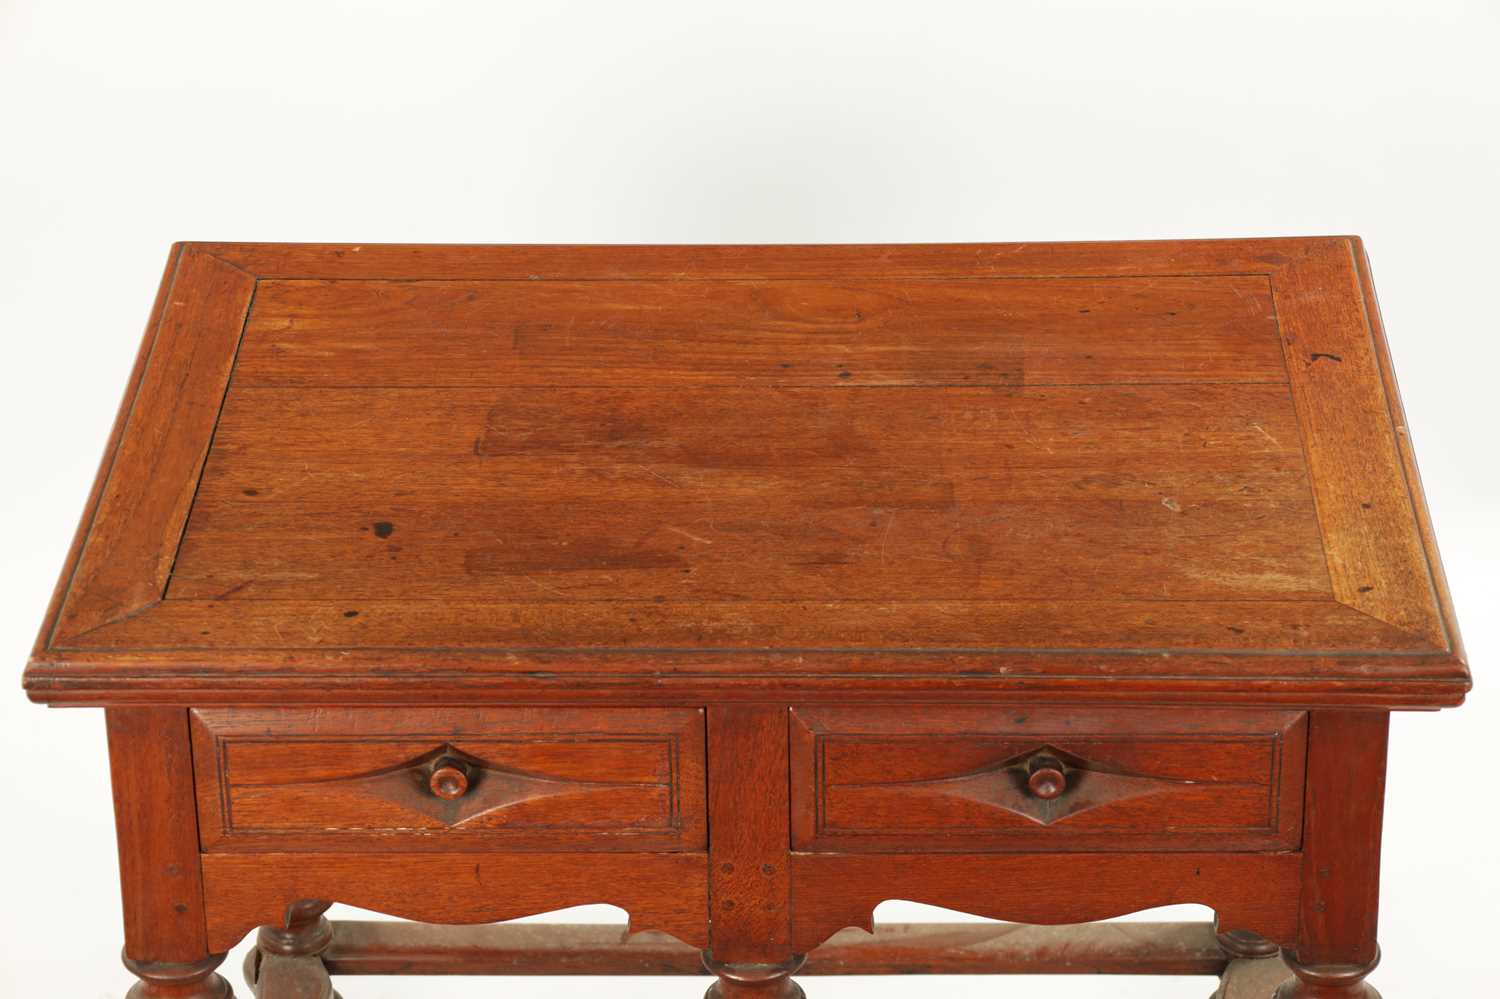 AN UNUSUAL 18TH CENTURY COLONIAL PADOUK WOOD TWO DRAWER TABLE ON BALLUSTER LEGS WITH SHAPED STRETCHE - Image 3 of 8